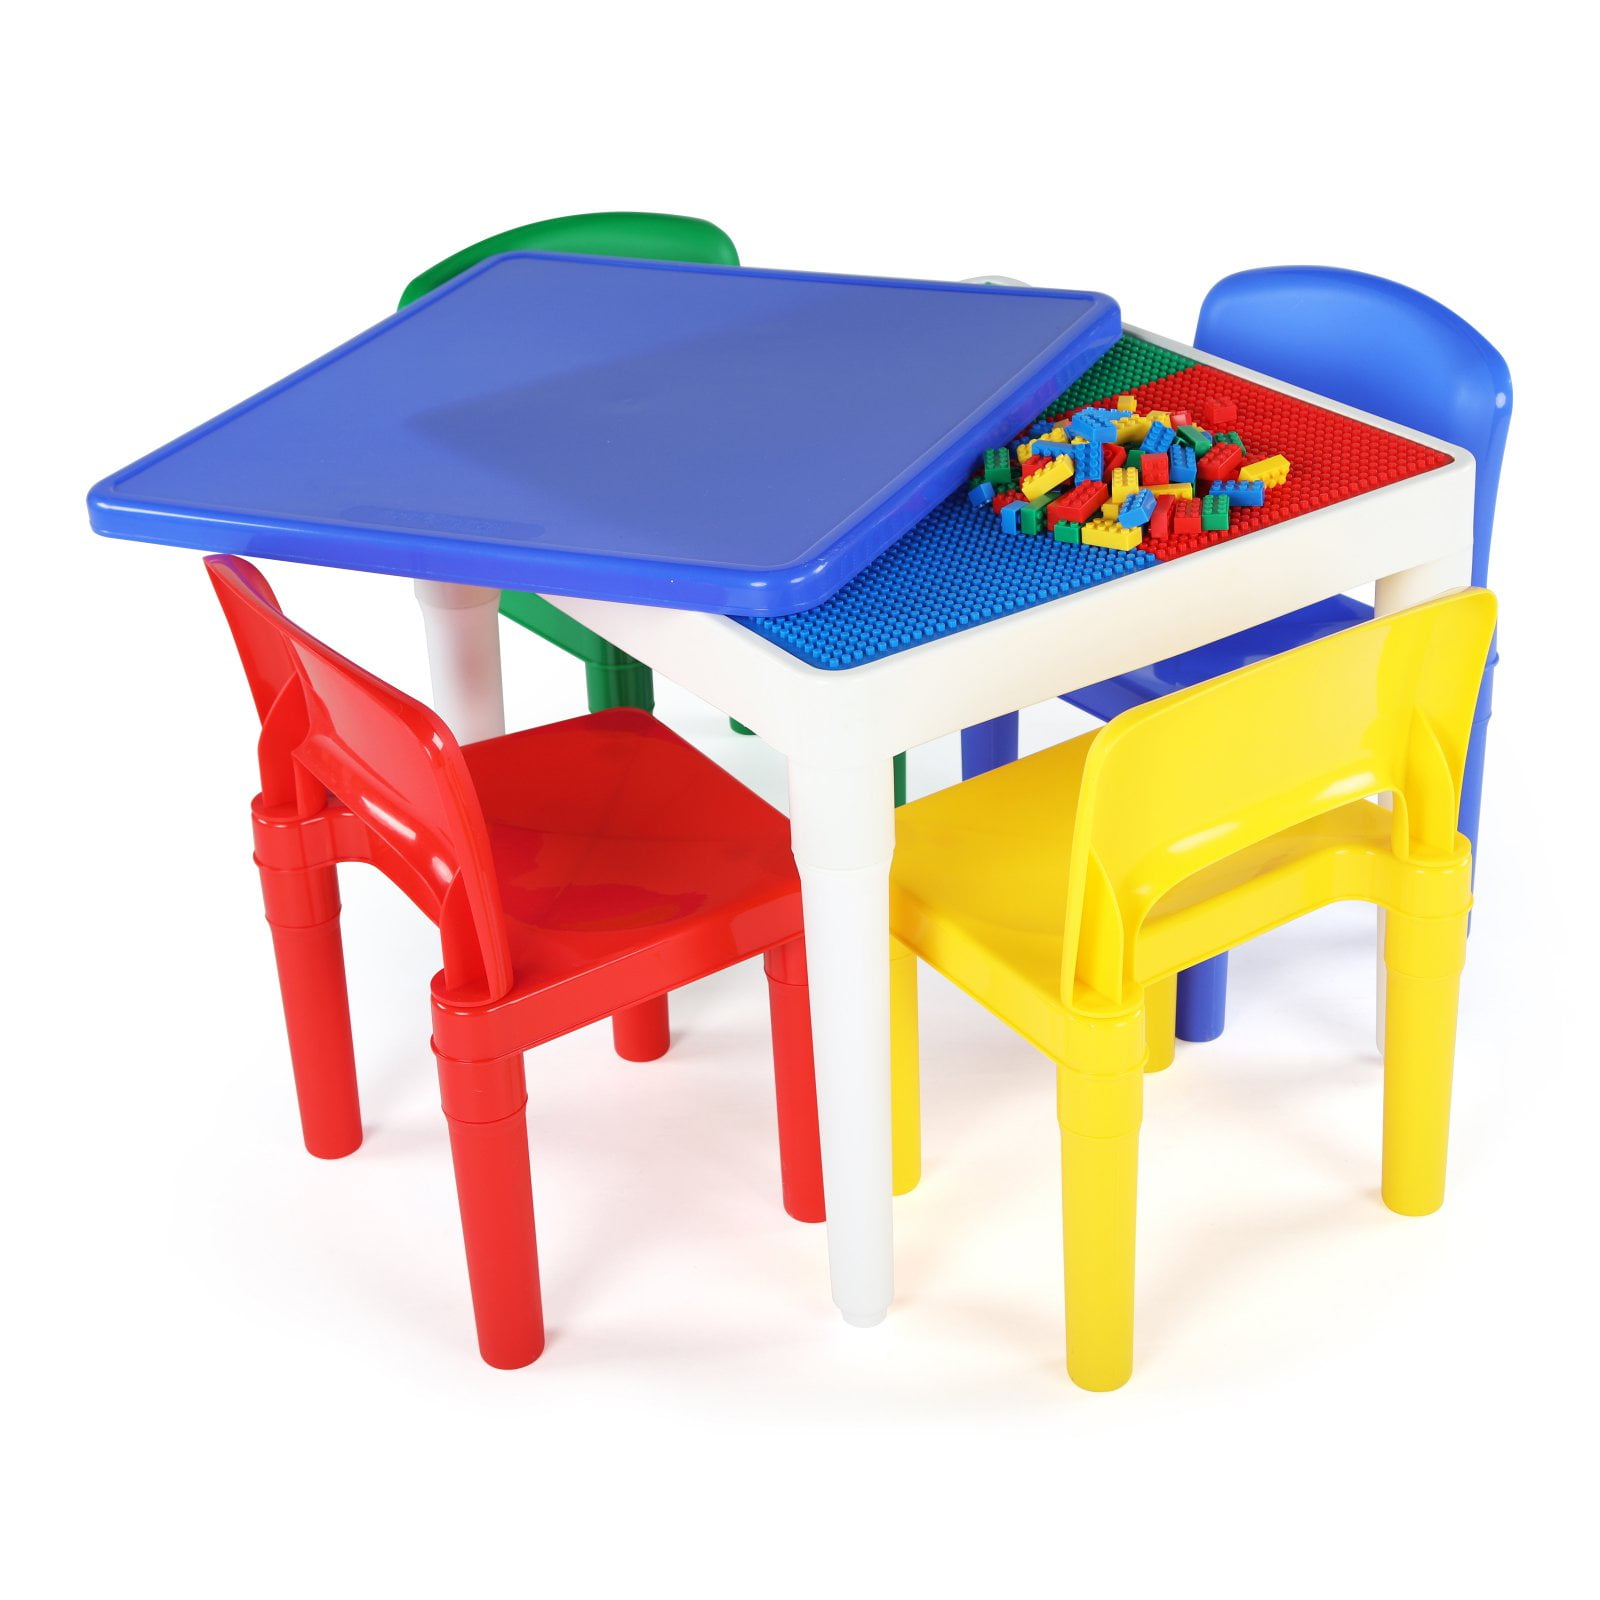 Primary colors for sale online Tot Tutors Kids 2-in-1 Plastic LEGO-Compatible Activity Table and 2 Chairs Set 